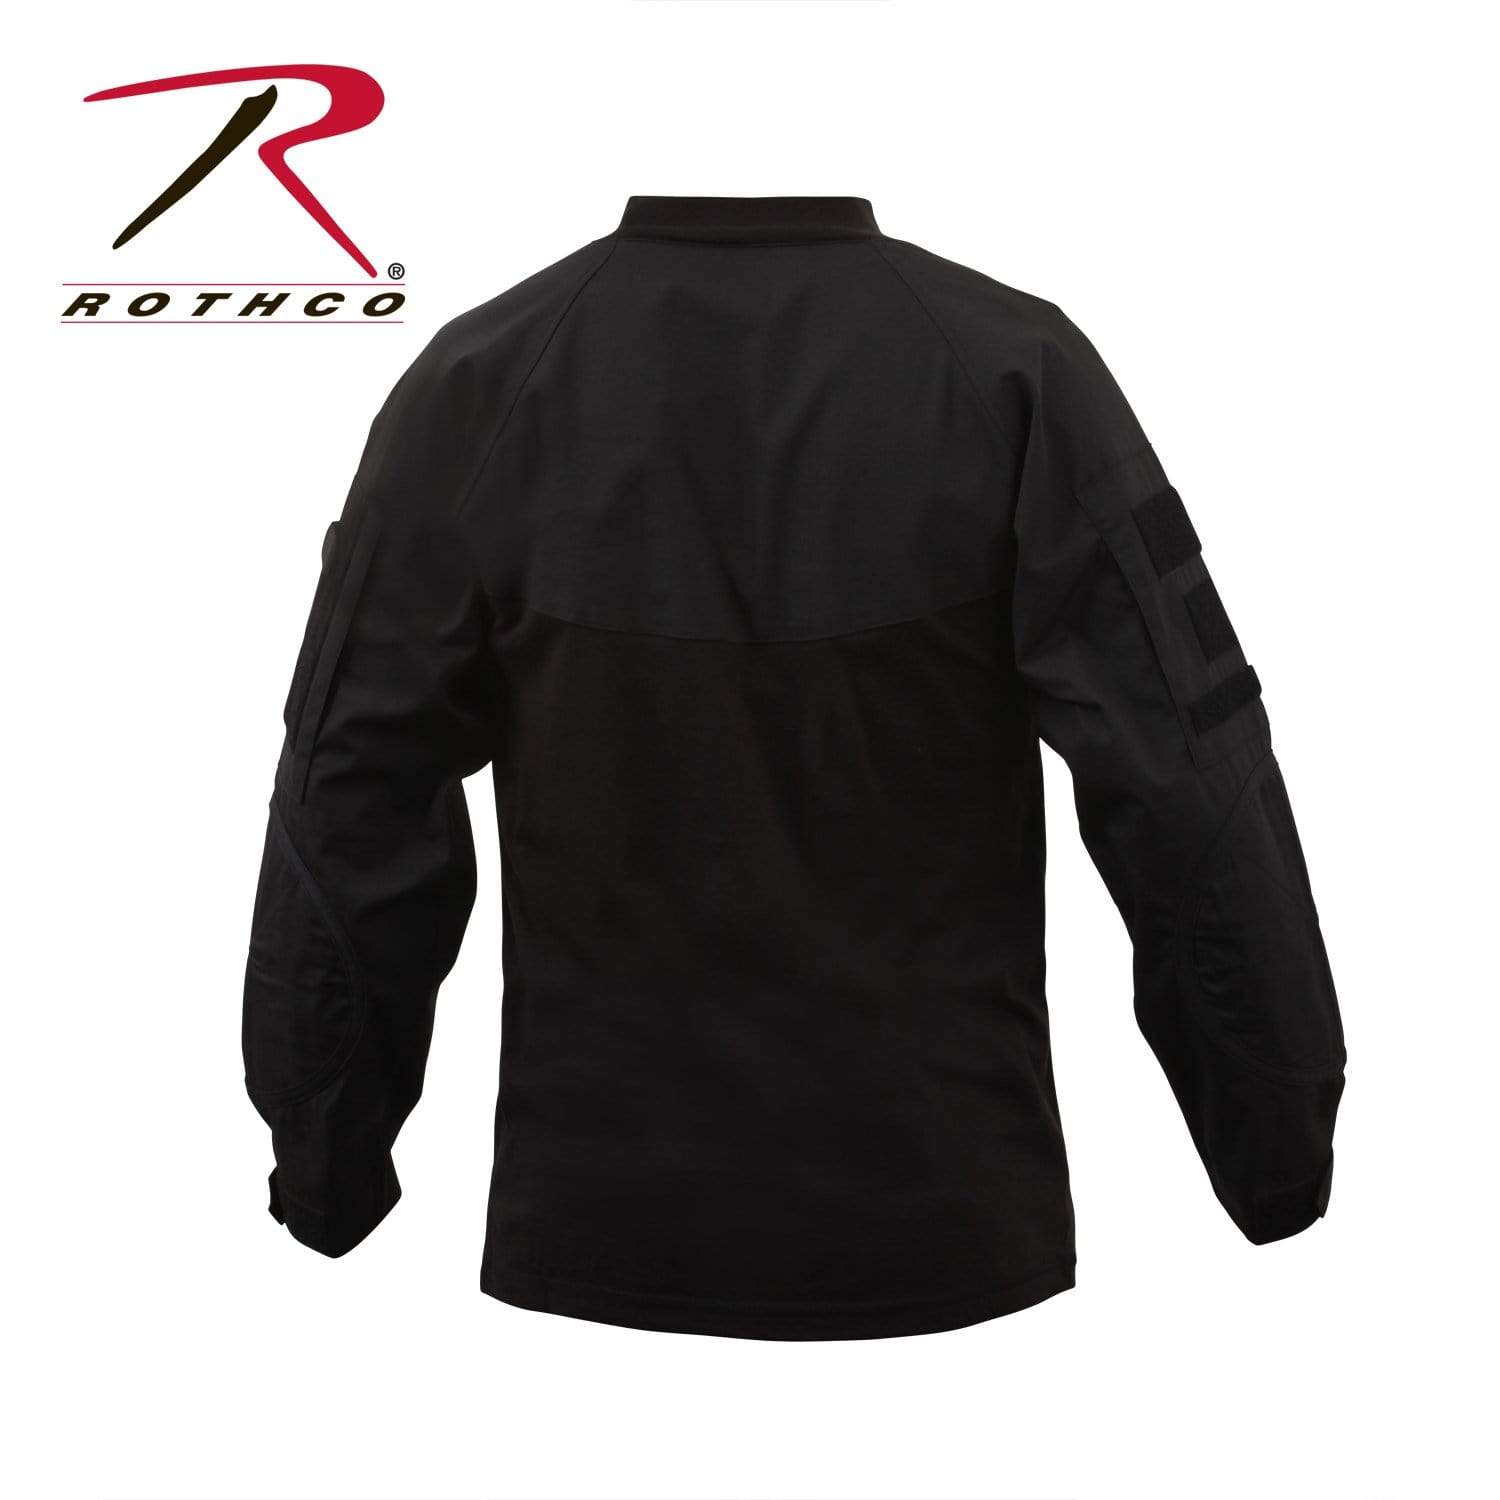 Rothco Military Combat Shirt- Black - Eminent Paintball And Airsoft